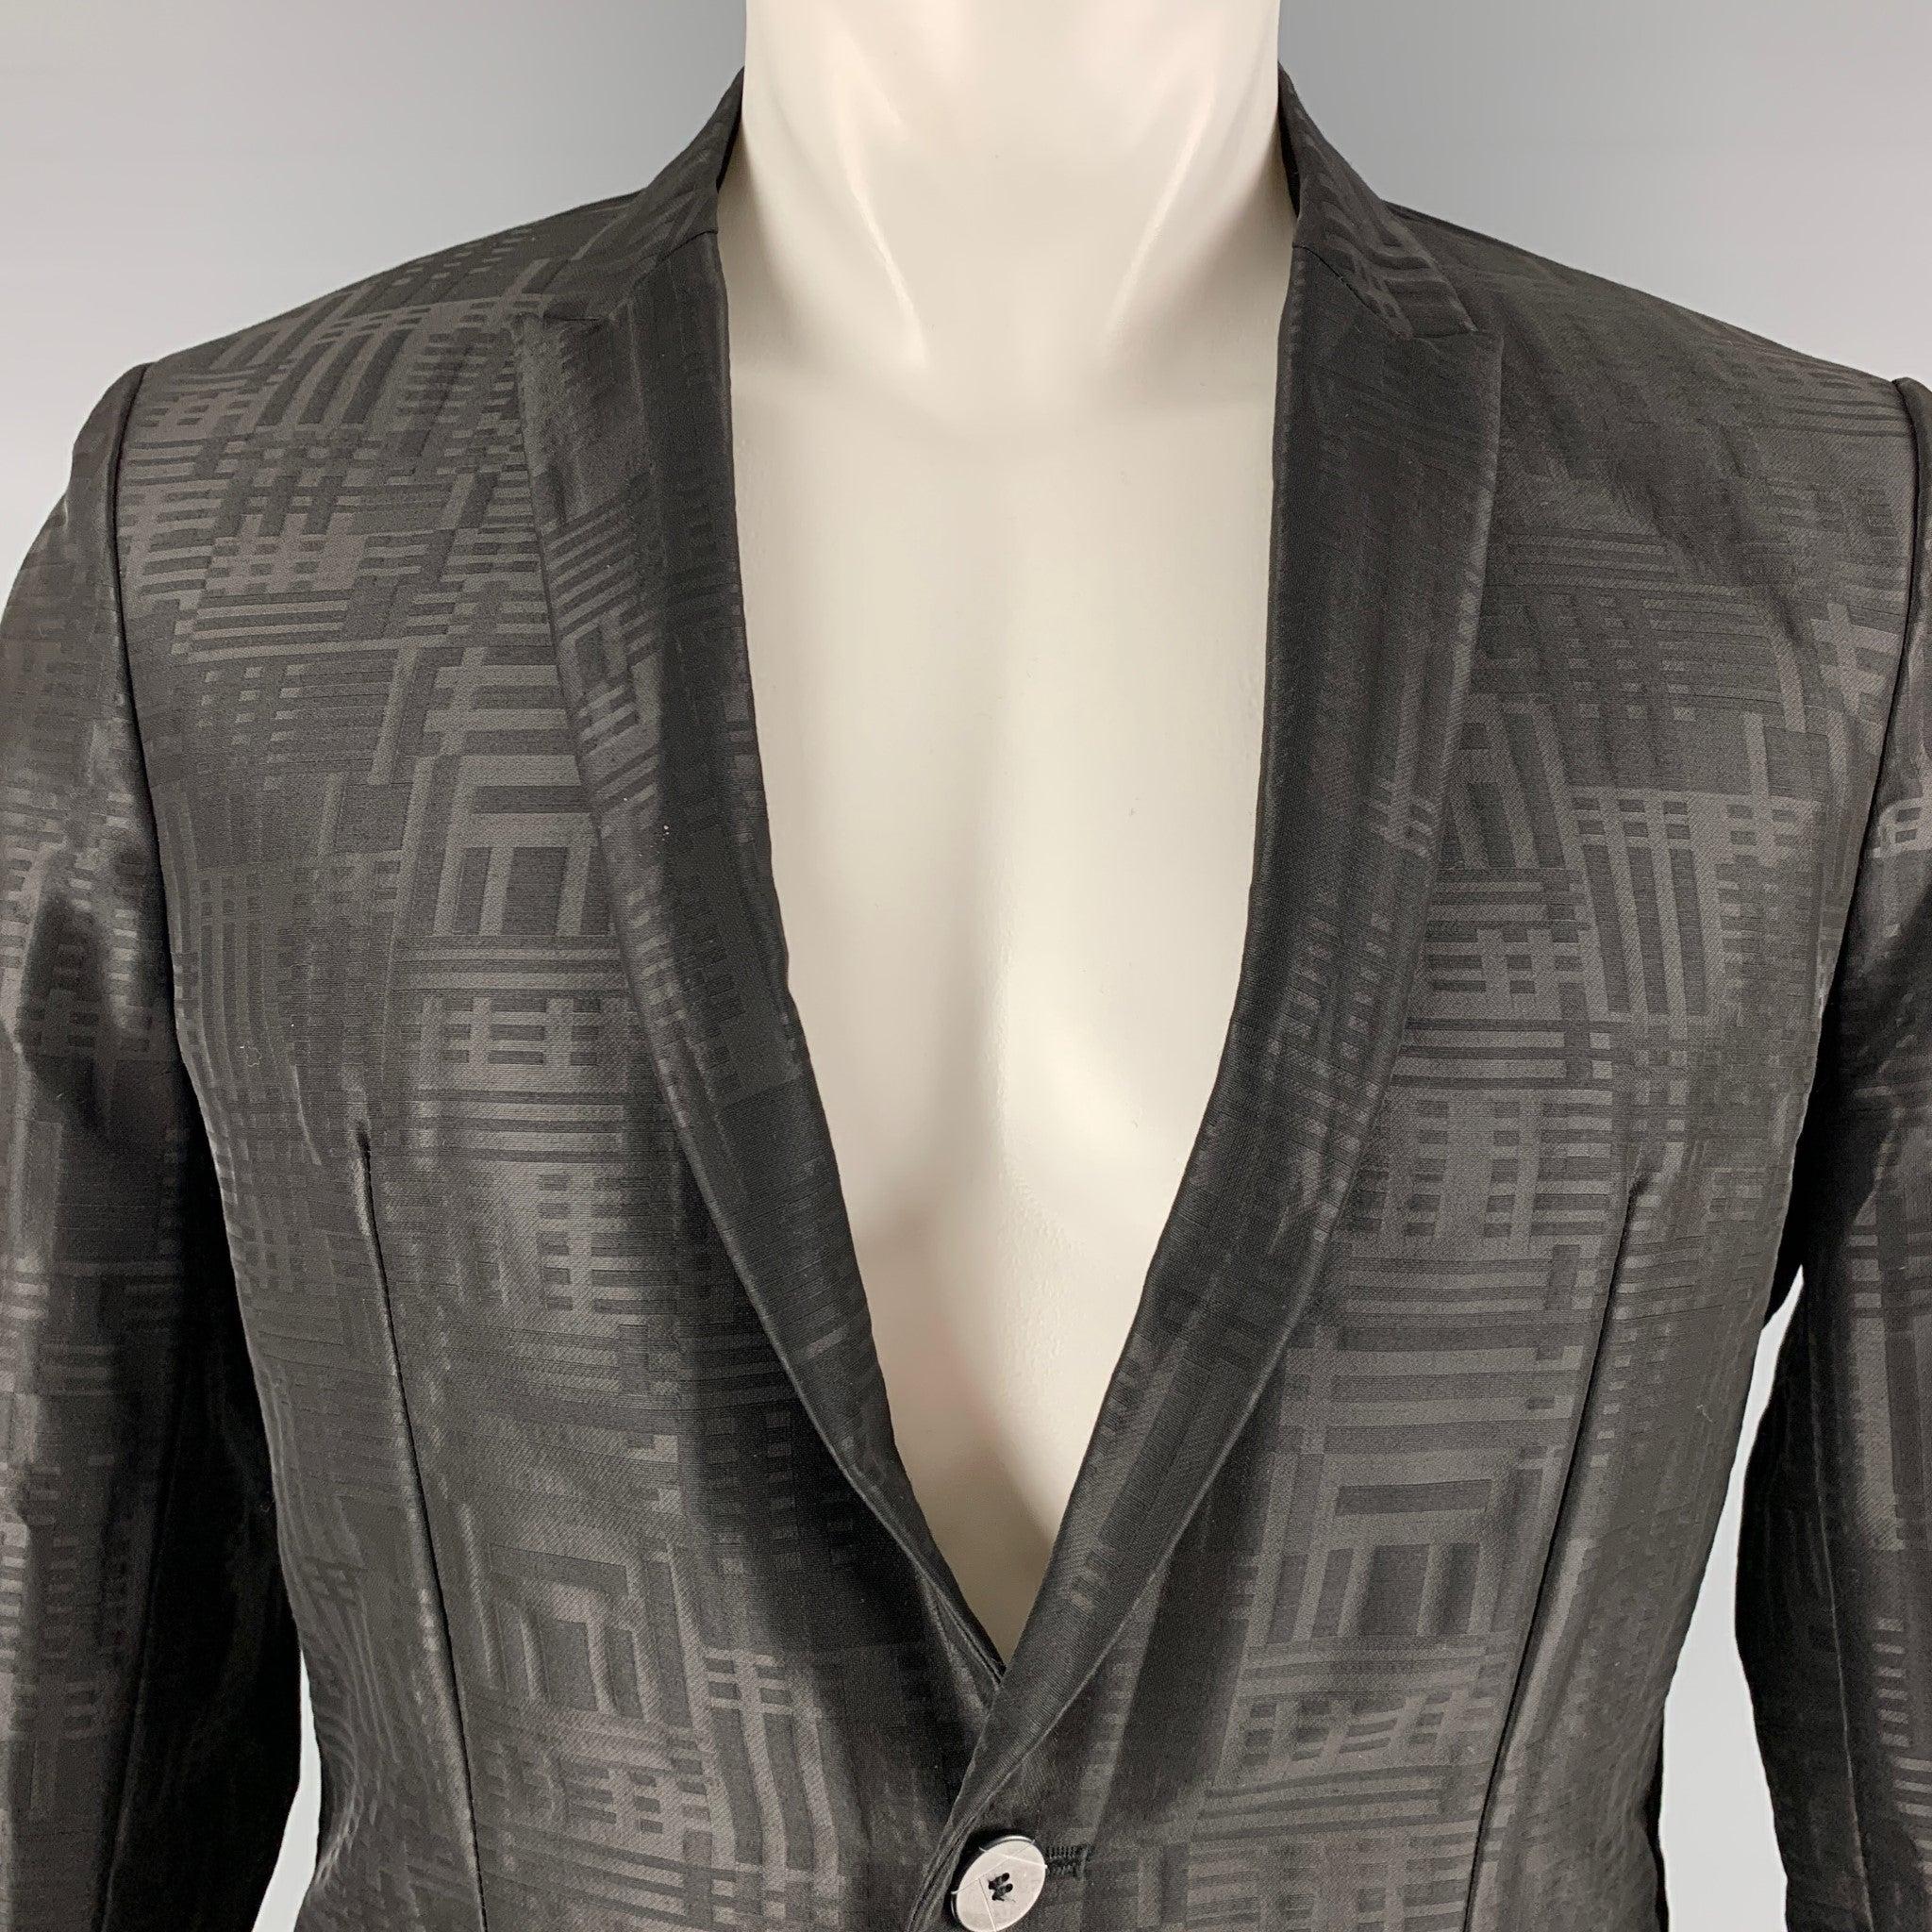 EMPORIO ARMANI sport coat comes in a black wool woven material full liner featuring a peak lapel, welt pockets, and a single button closure. Made in Italy.Excellent Pre-Owned Condition.  

Marked:   48 

Measurements: 
 
Shoulder: 16.25 inches